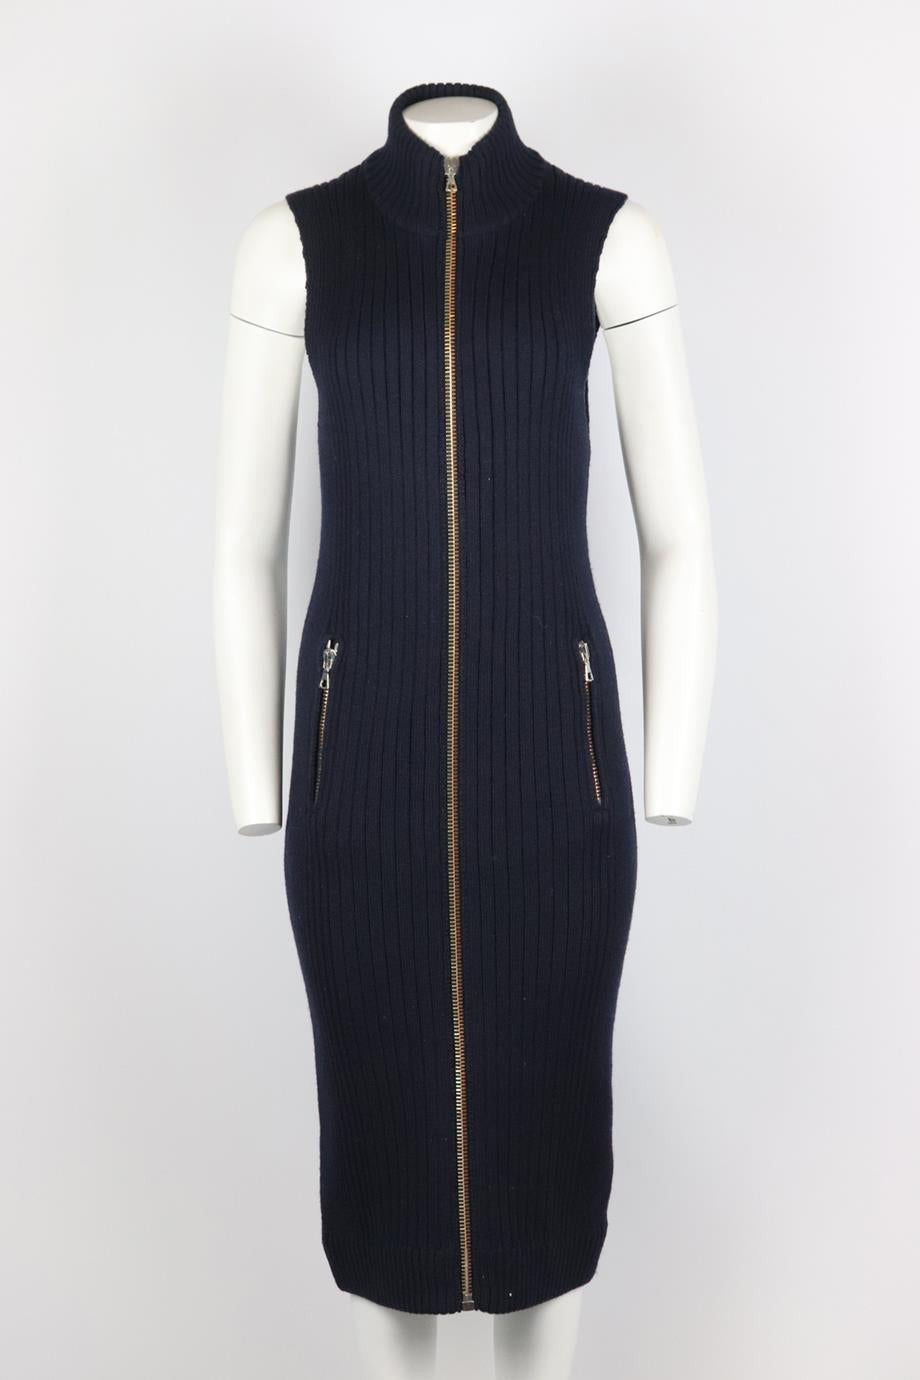 Acne Studios ribbed wool midi dress. Navy. Sleeveless, mock neck. Zip fastening at the front. 100% Wool. Size: XSmall (UK 6, US 2, FR 34, IT 38). Bust: 32 in. Waist: 30 in. Hips: 32 in. Length: 43 in. Very good condition - Some light signs of wear;